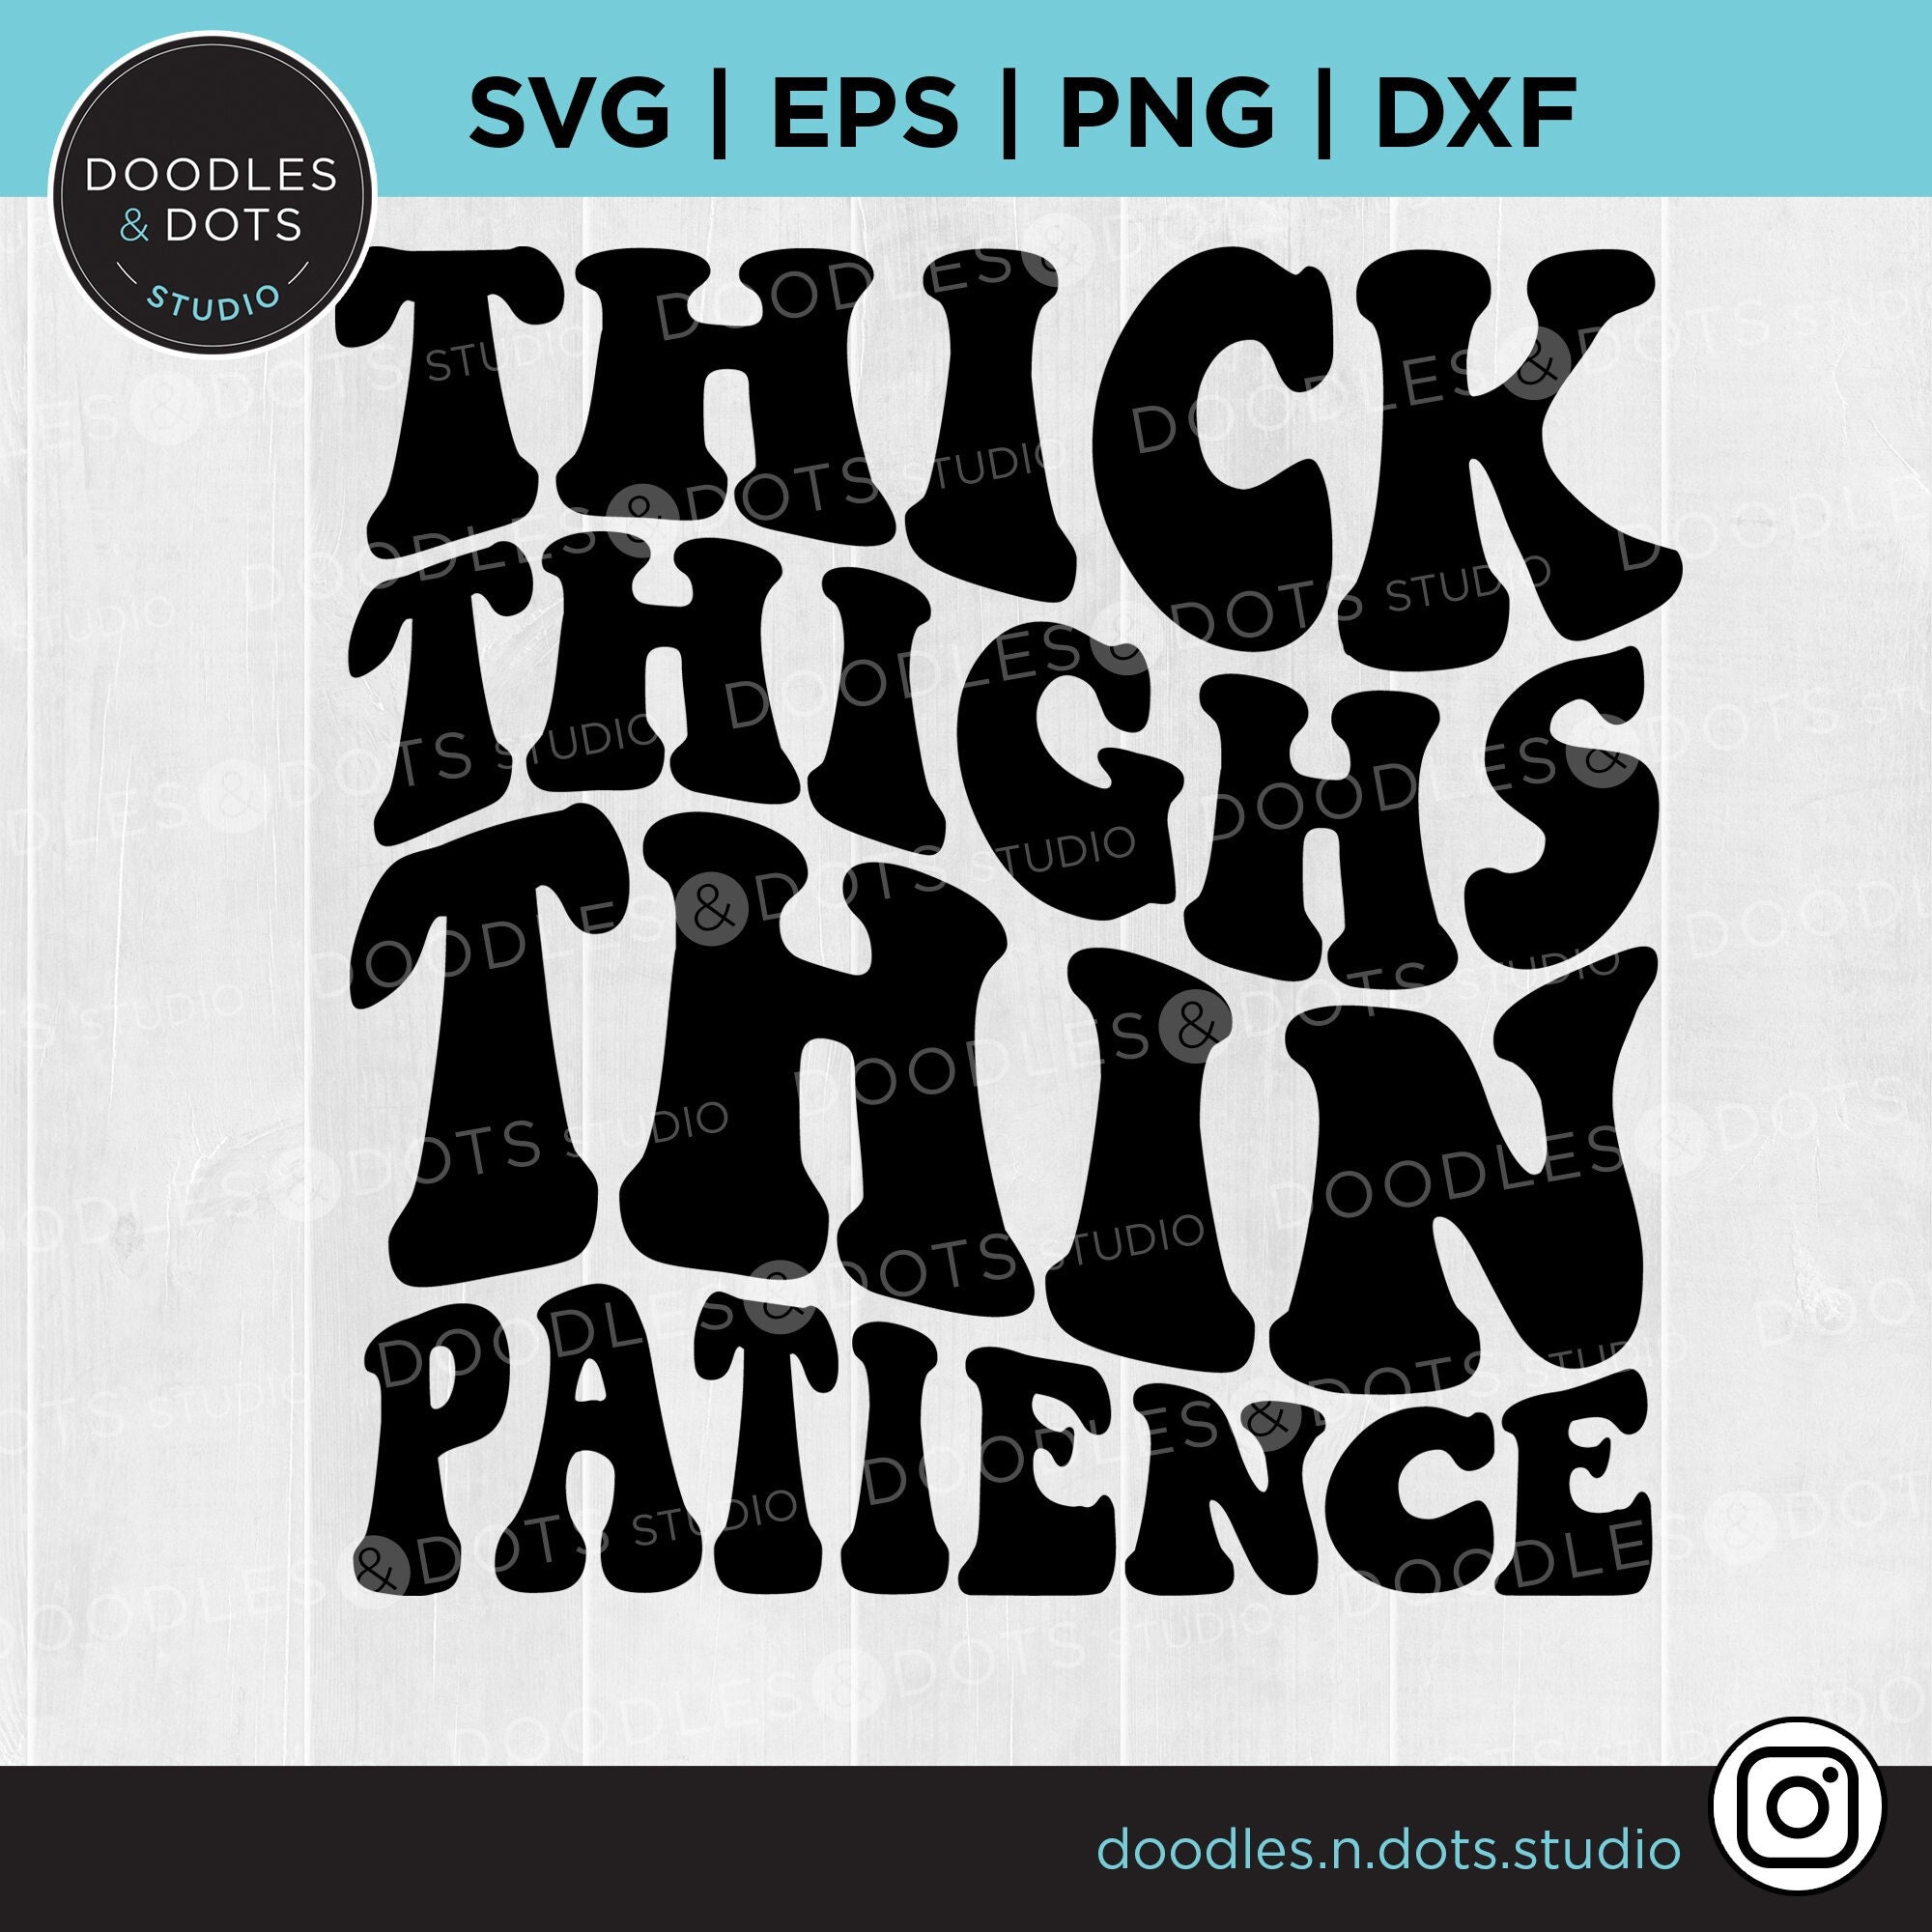 Thick Thighs Thin Patience Svg, Thick Thighs Svg, Thick Thighs Shirt,  Patience Svg for Cricut or Silhouette, Thick Thighs Cut File Download -   Canada